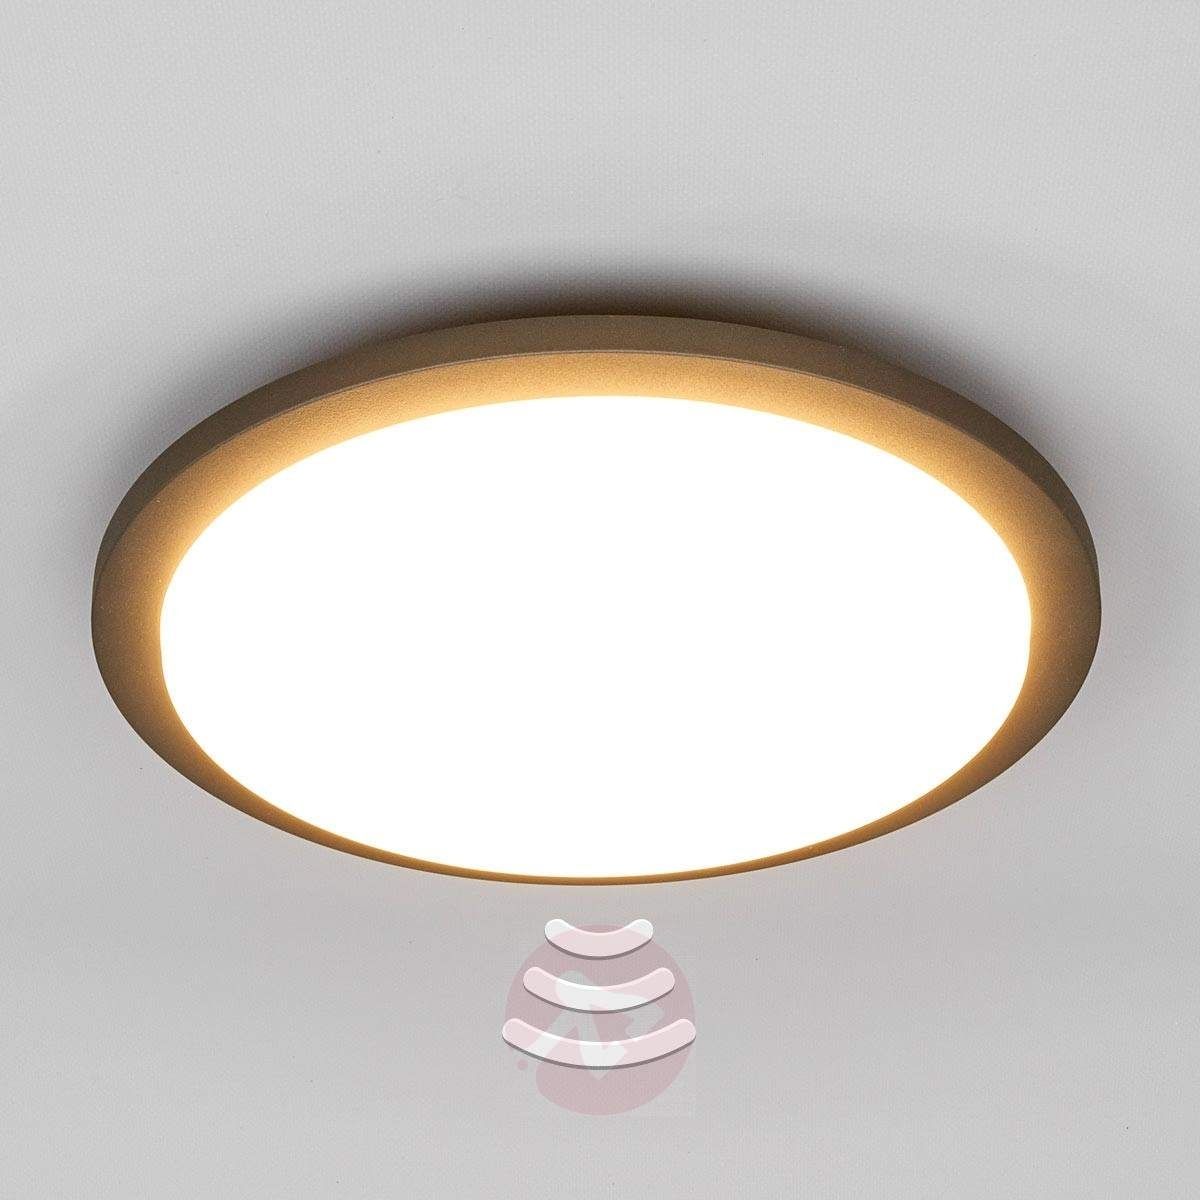 Benton – Led Outdoor Ceiling Light With Sensor | Lights.co.uk Pertaining To Outdoor Ceiling Sensor Lights (Photo 5 of 15)